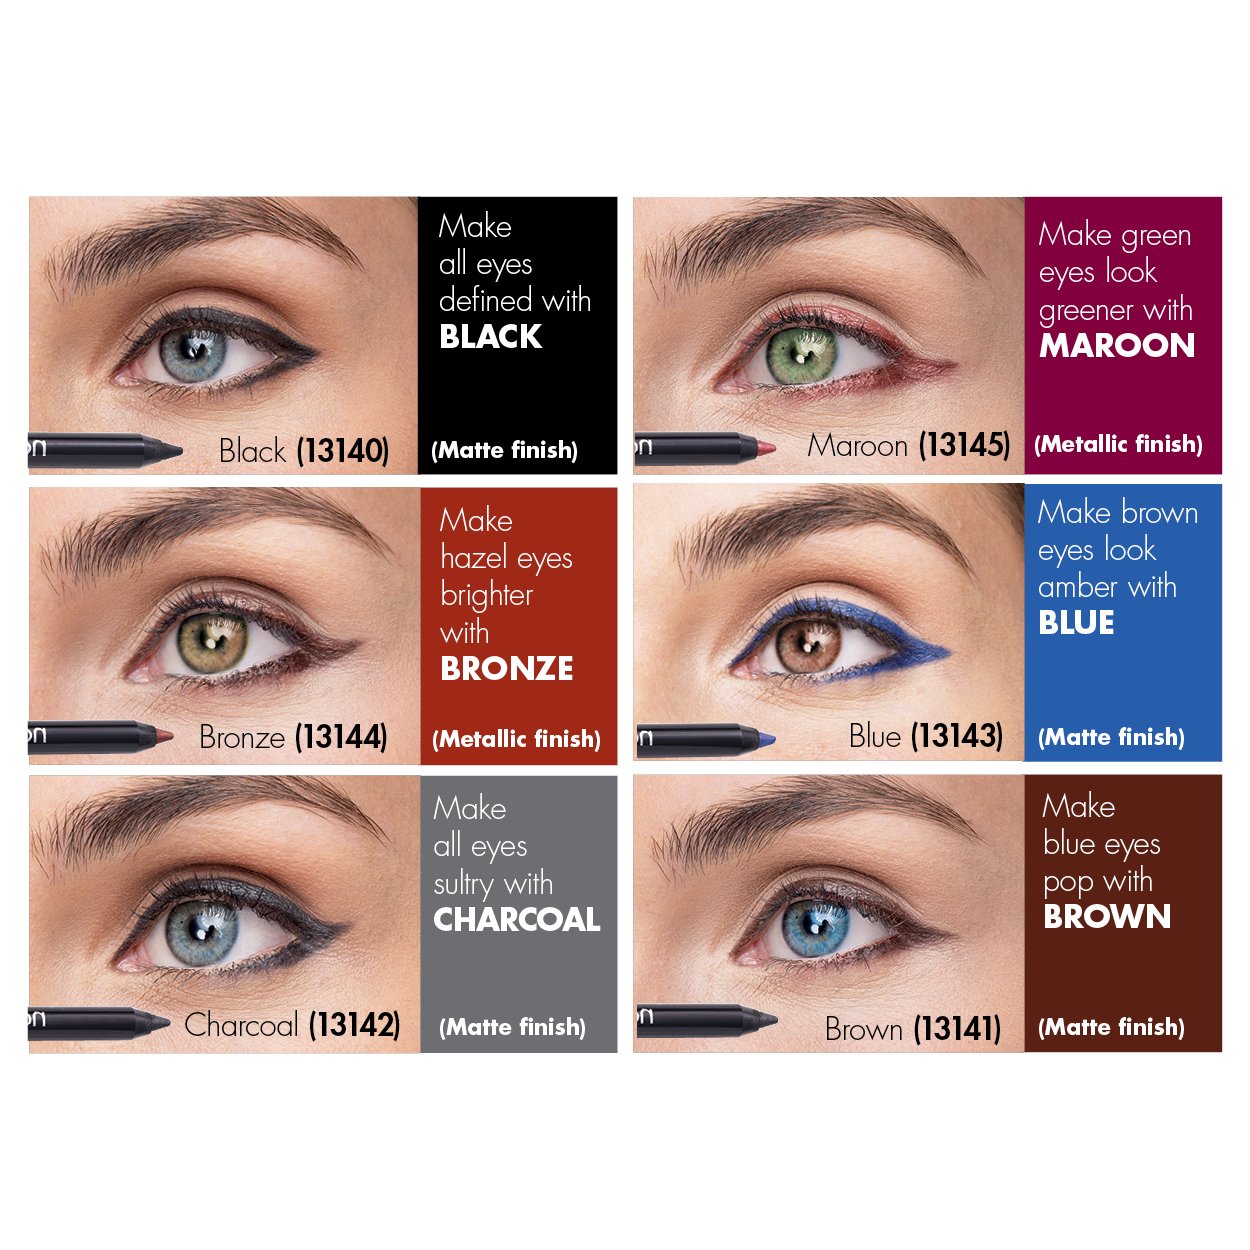 How to match your eye pencil to your eye colour